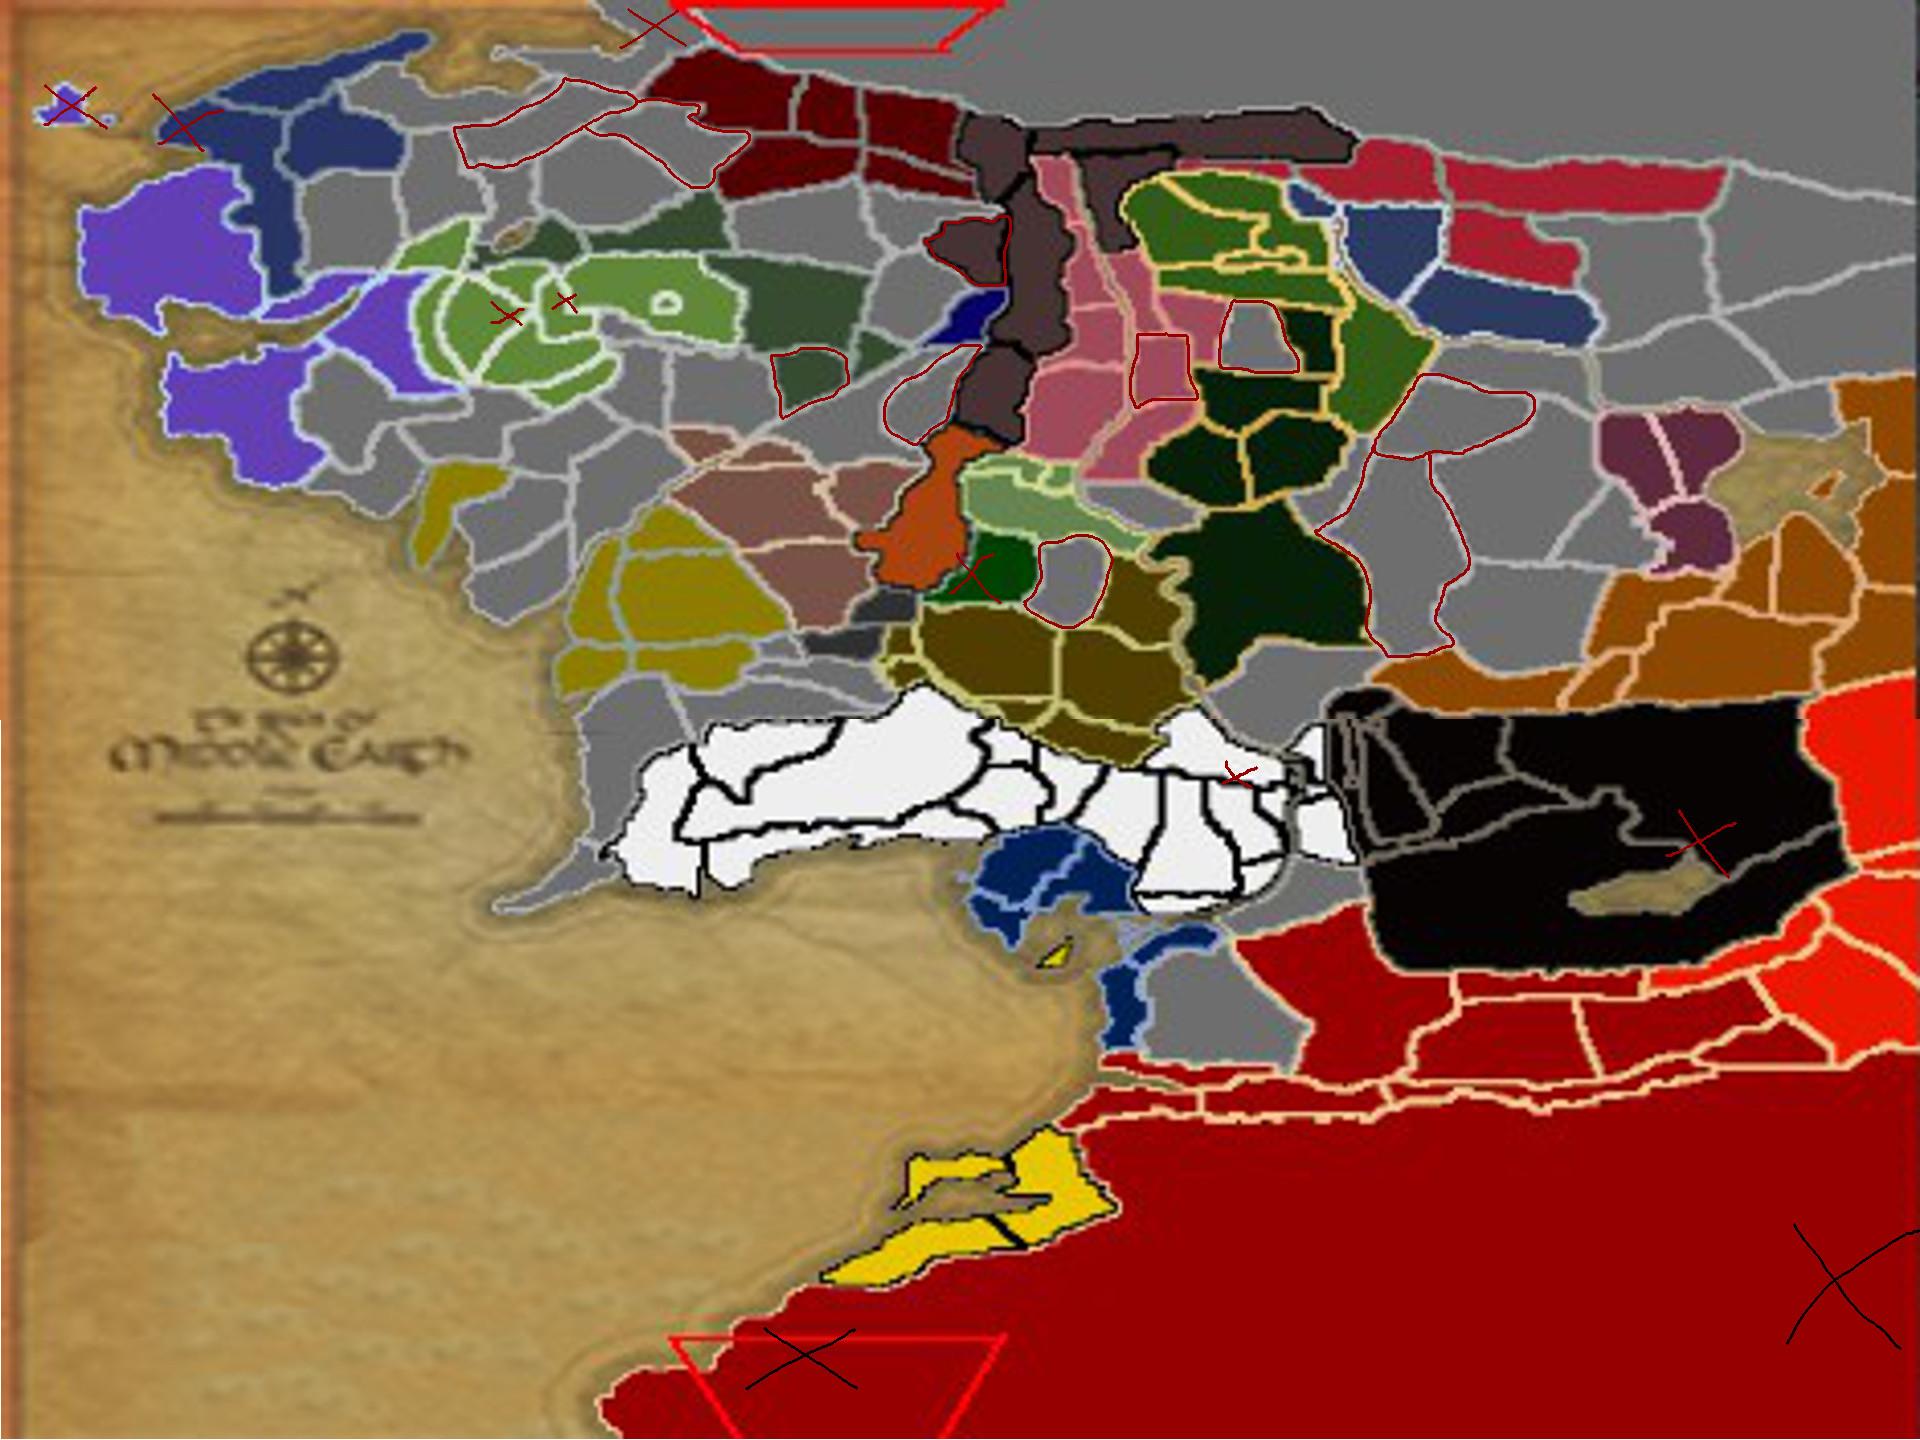 third age total war divide and conquer map